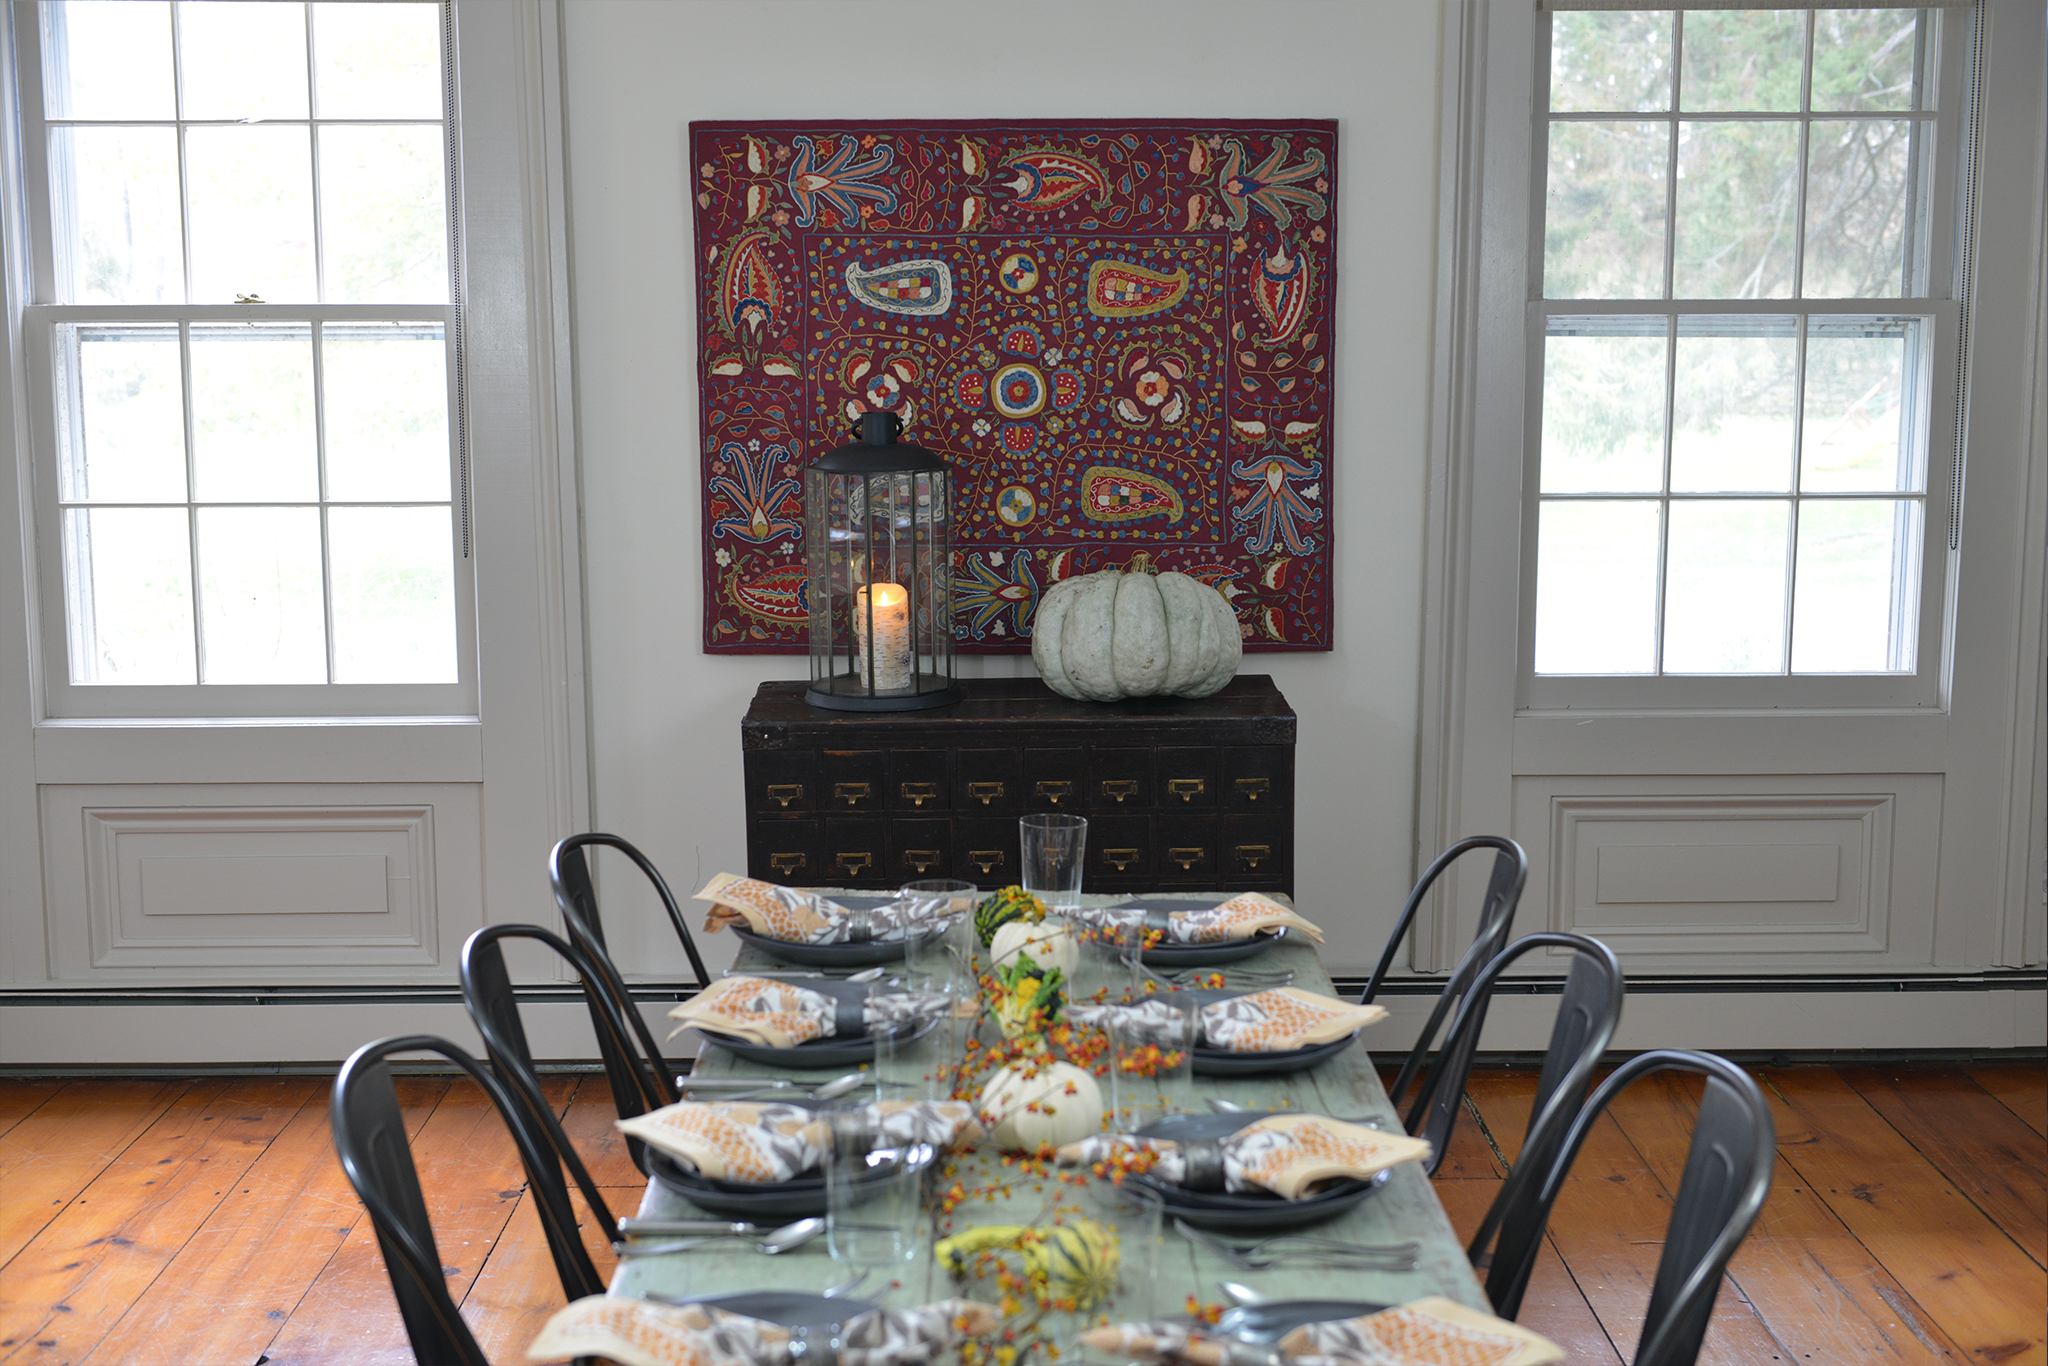 Thanksgiving table set in old home with hardwood floors